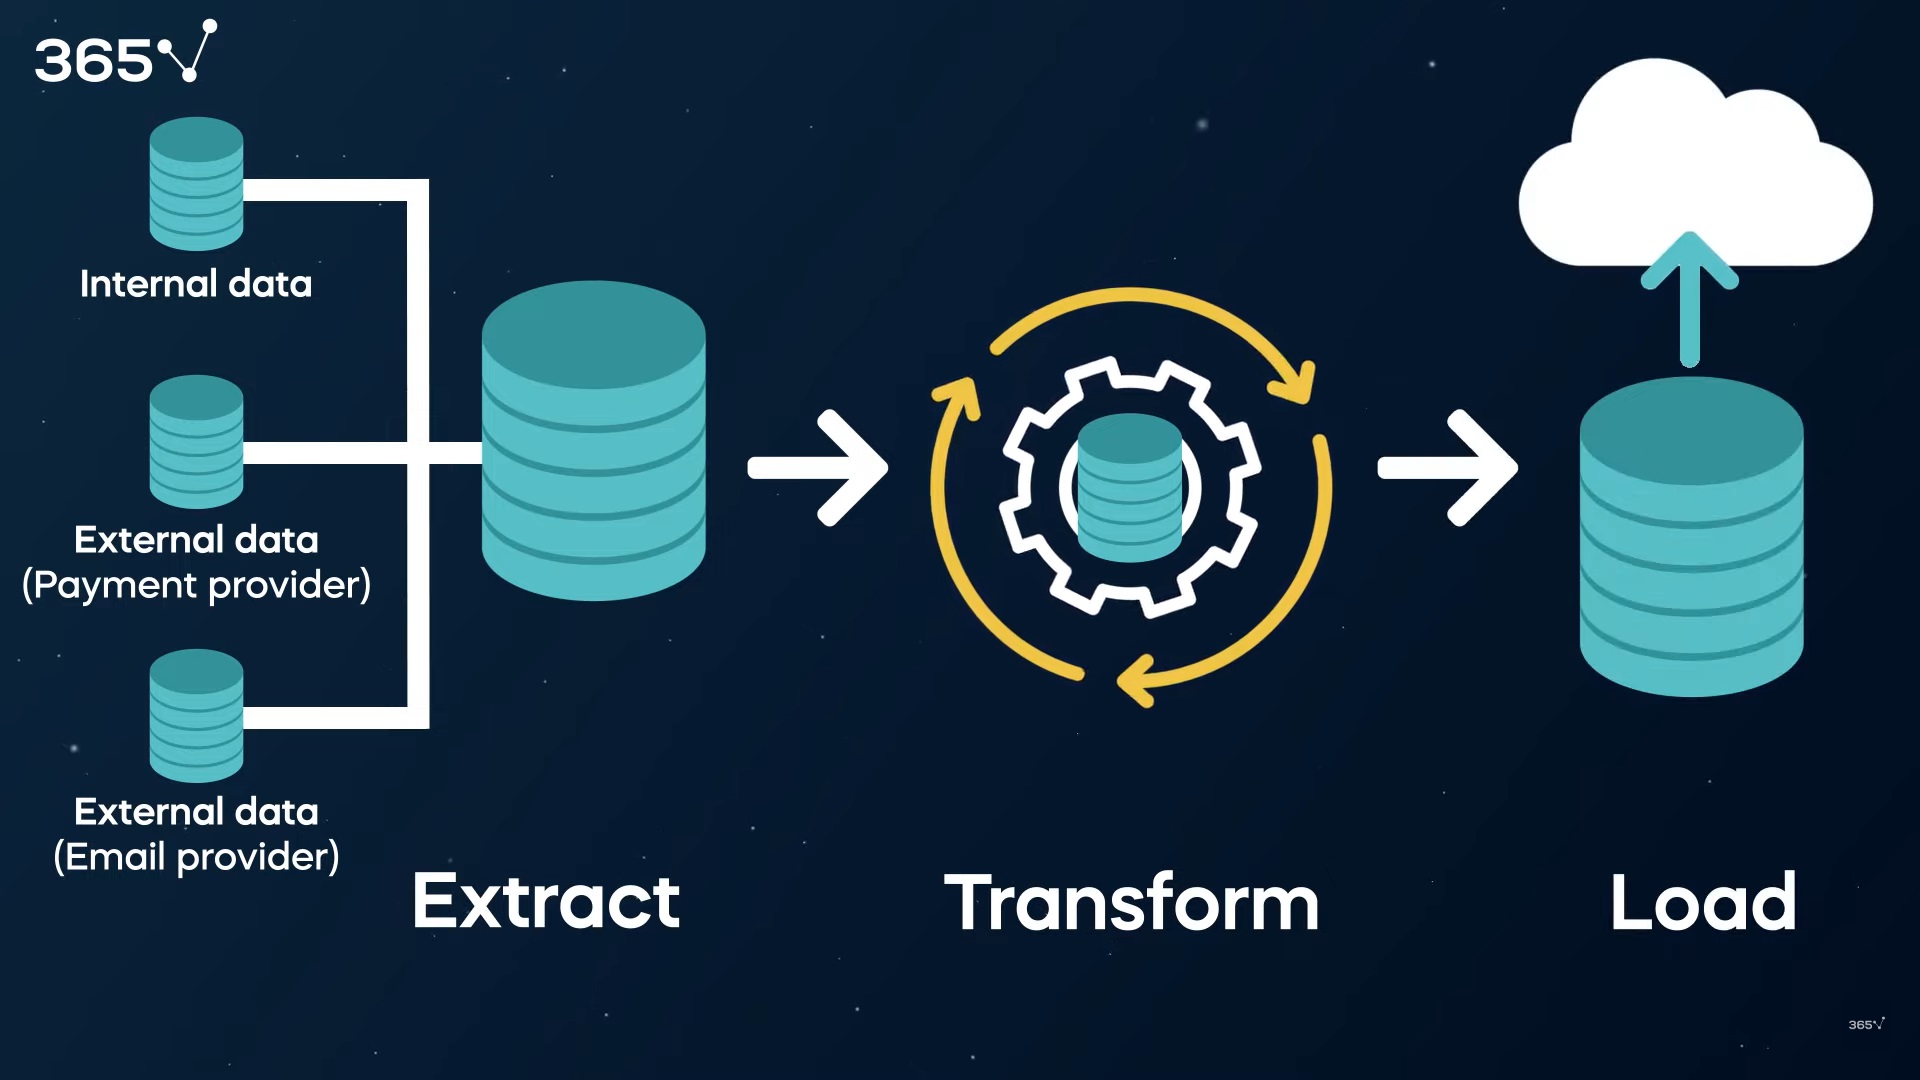 A visual representation of the Extract, Transform, Load (ETL) process that the data analyst created using internal and external data.